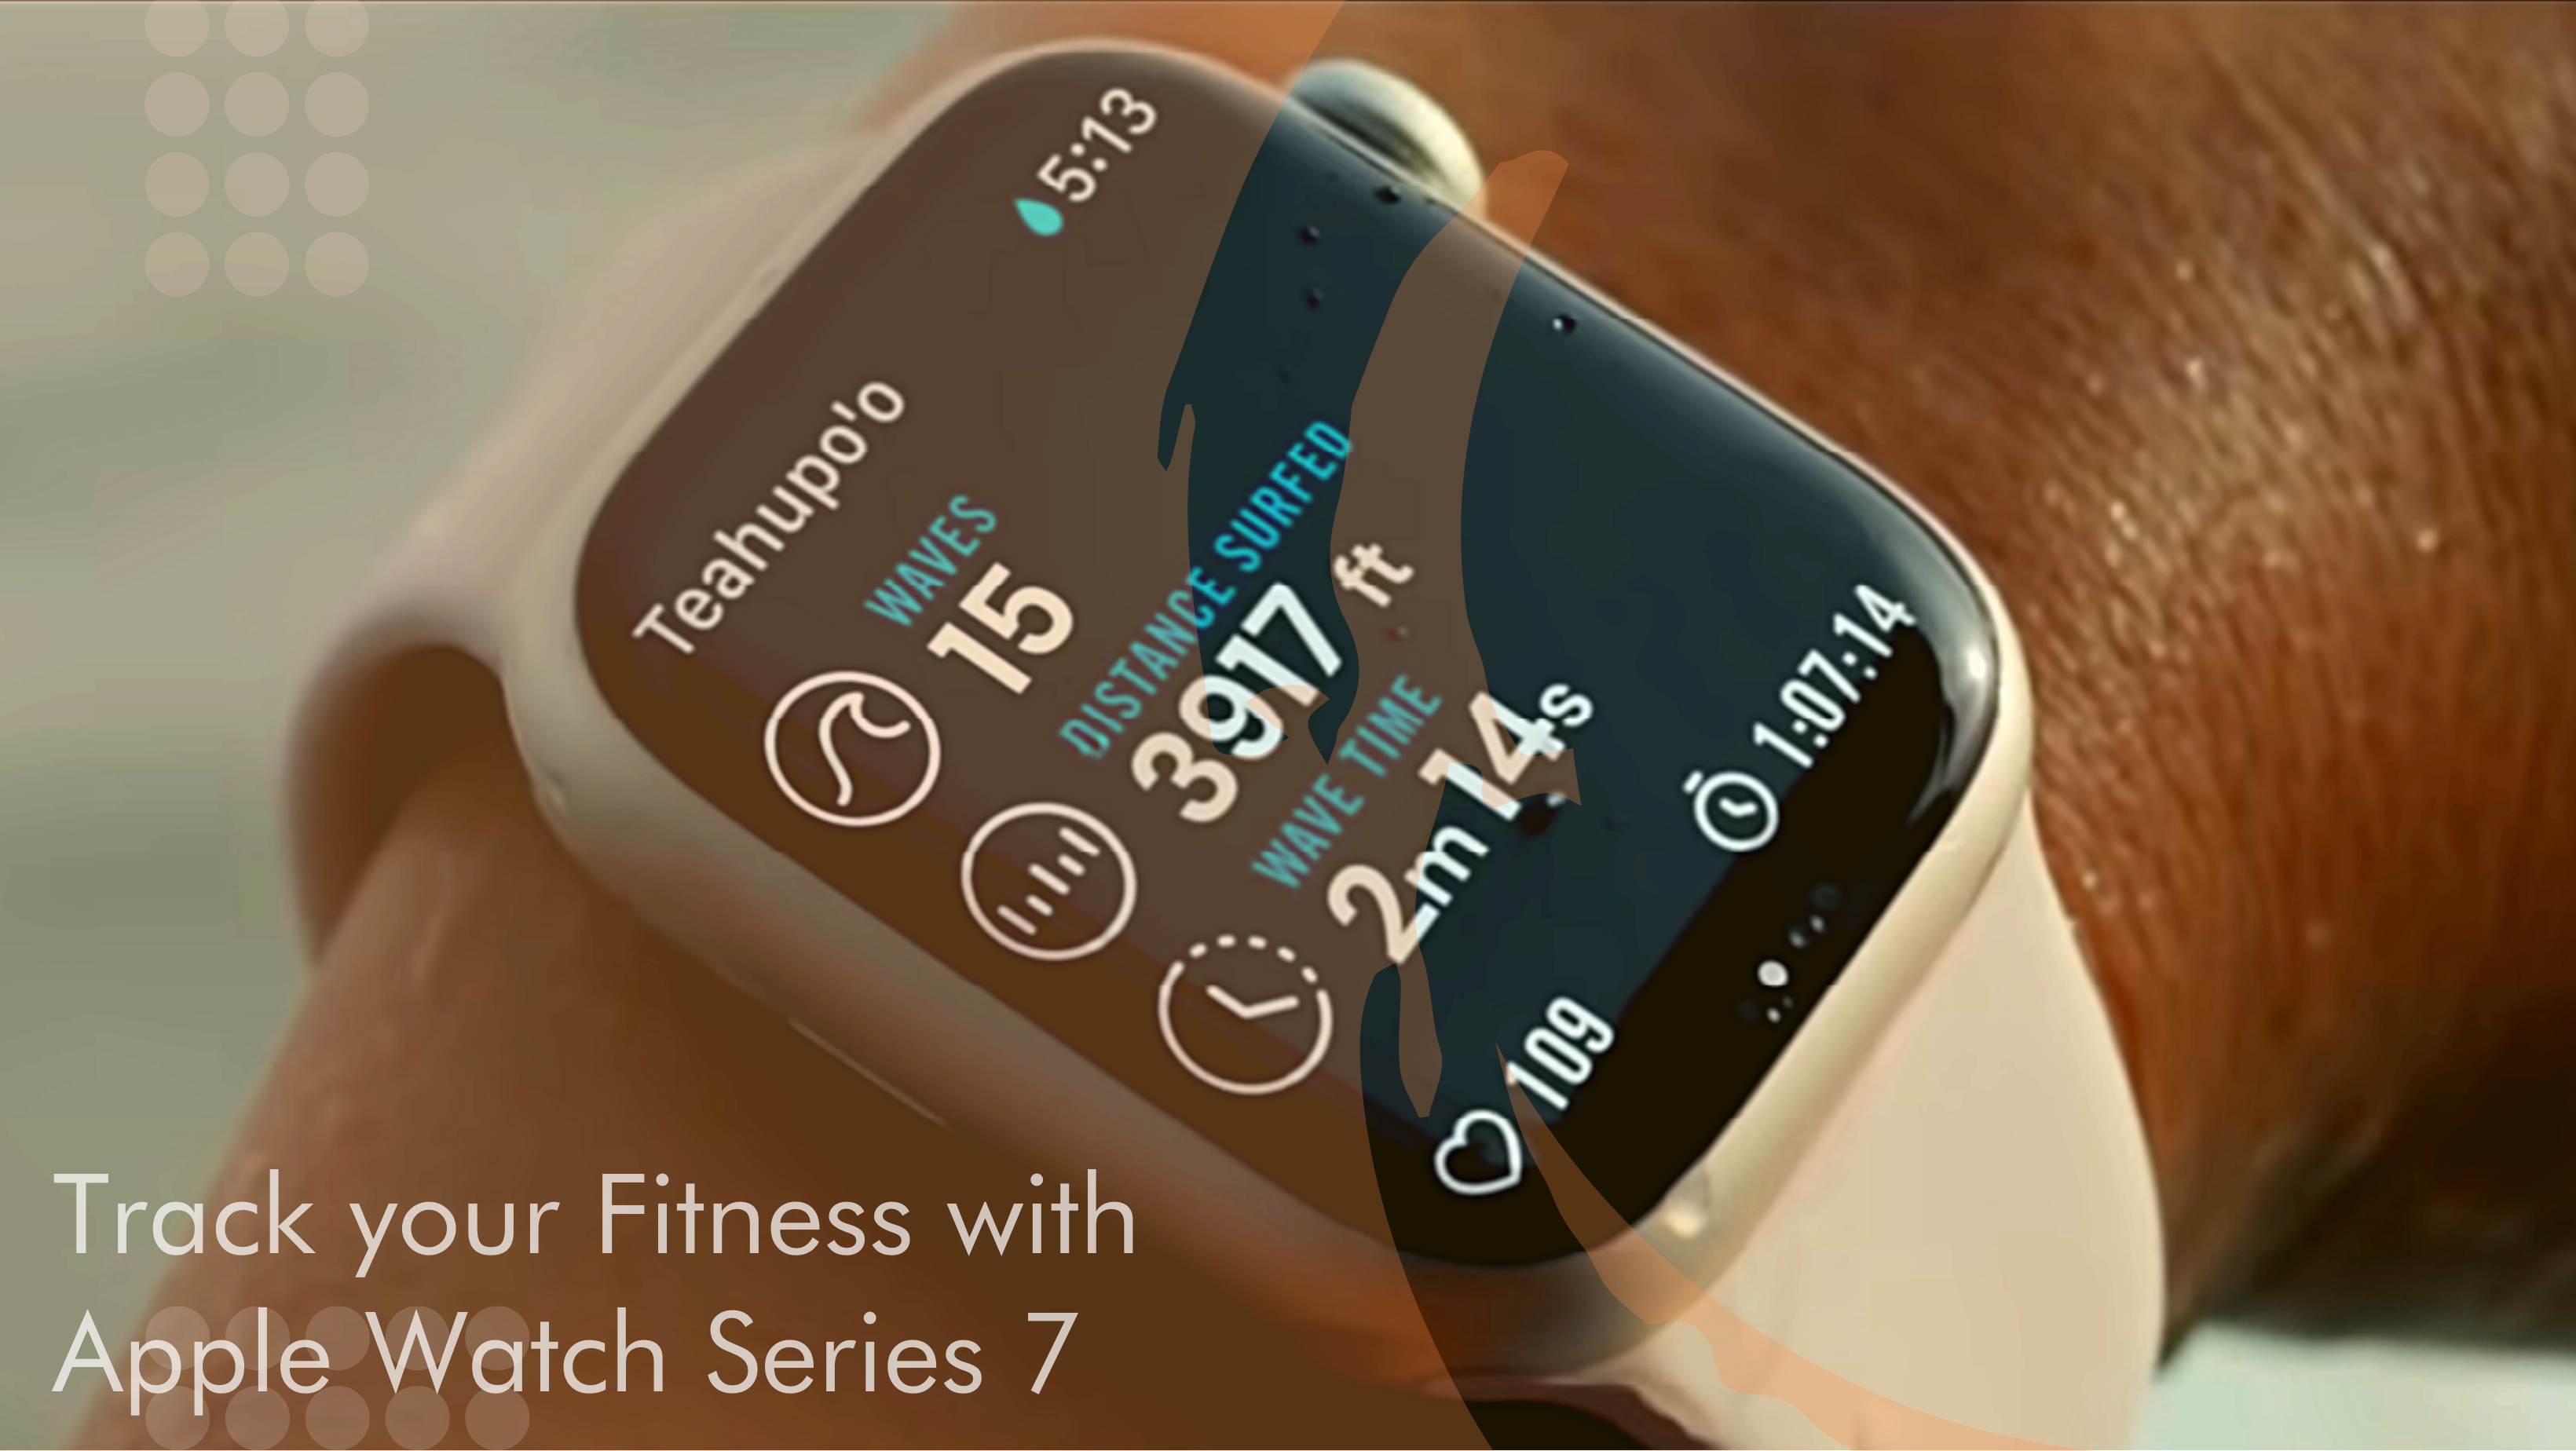 Track your fitness with Apple Watch Series 7